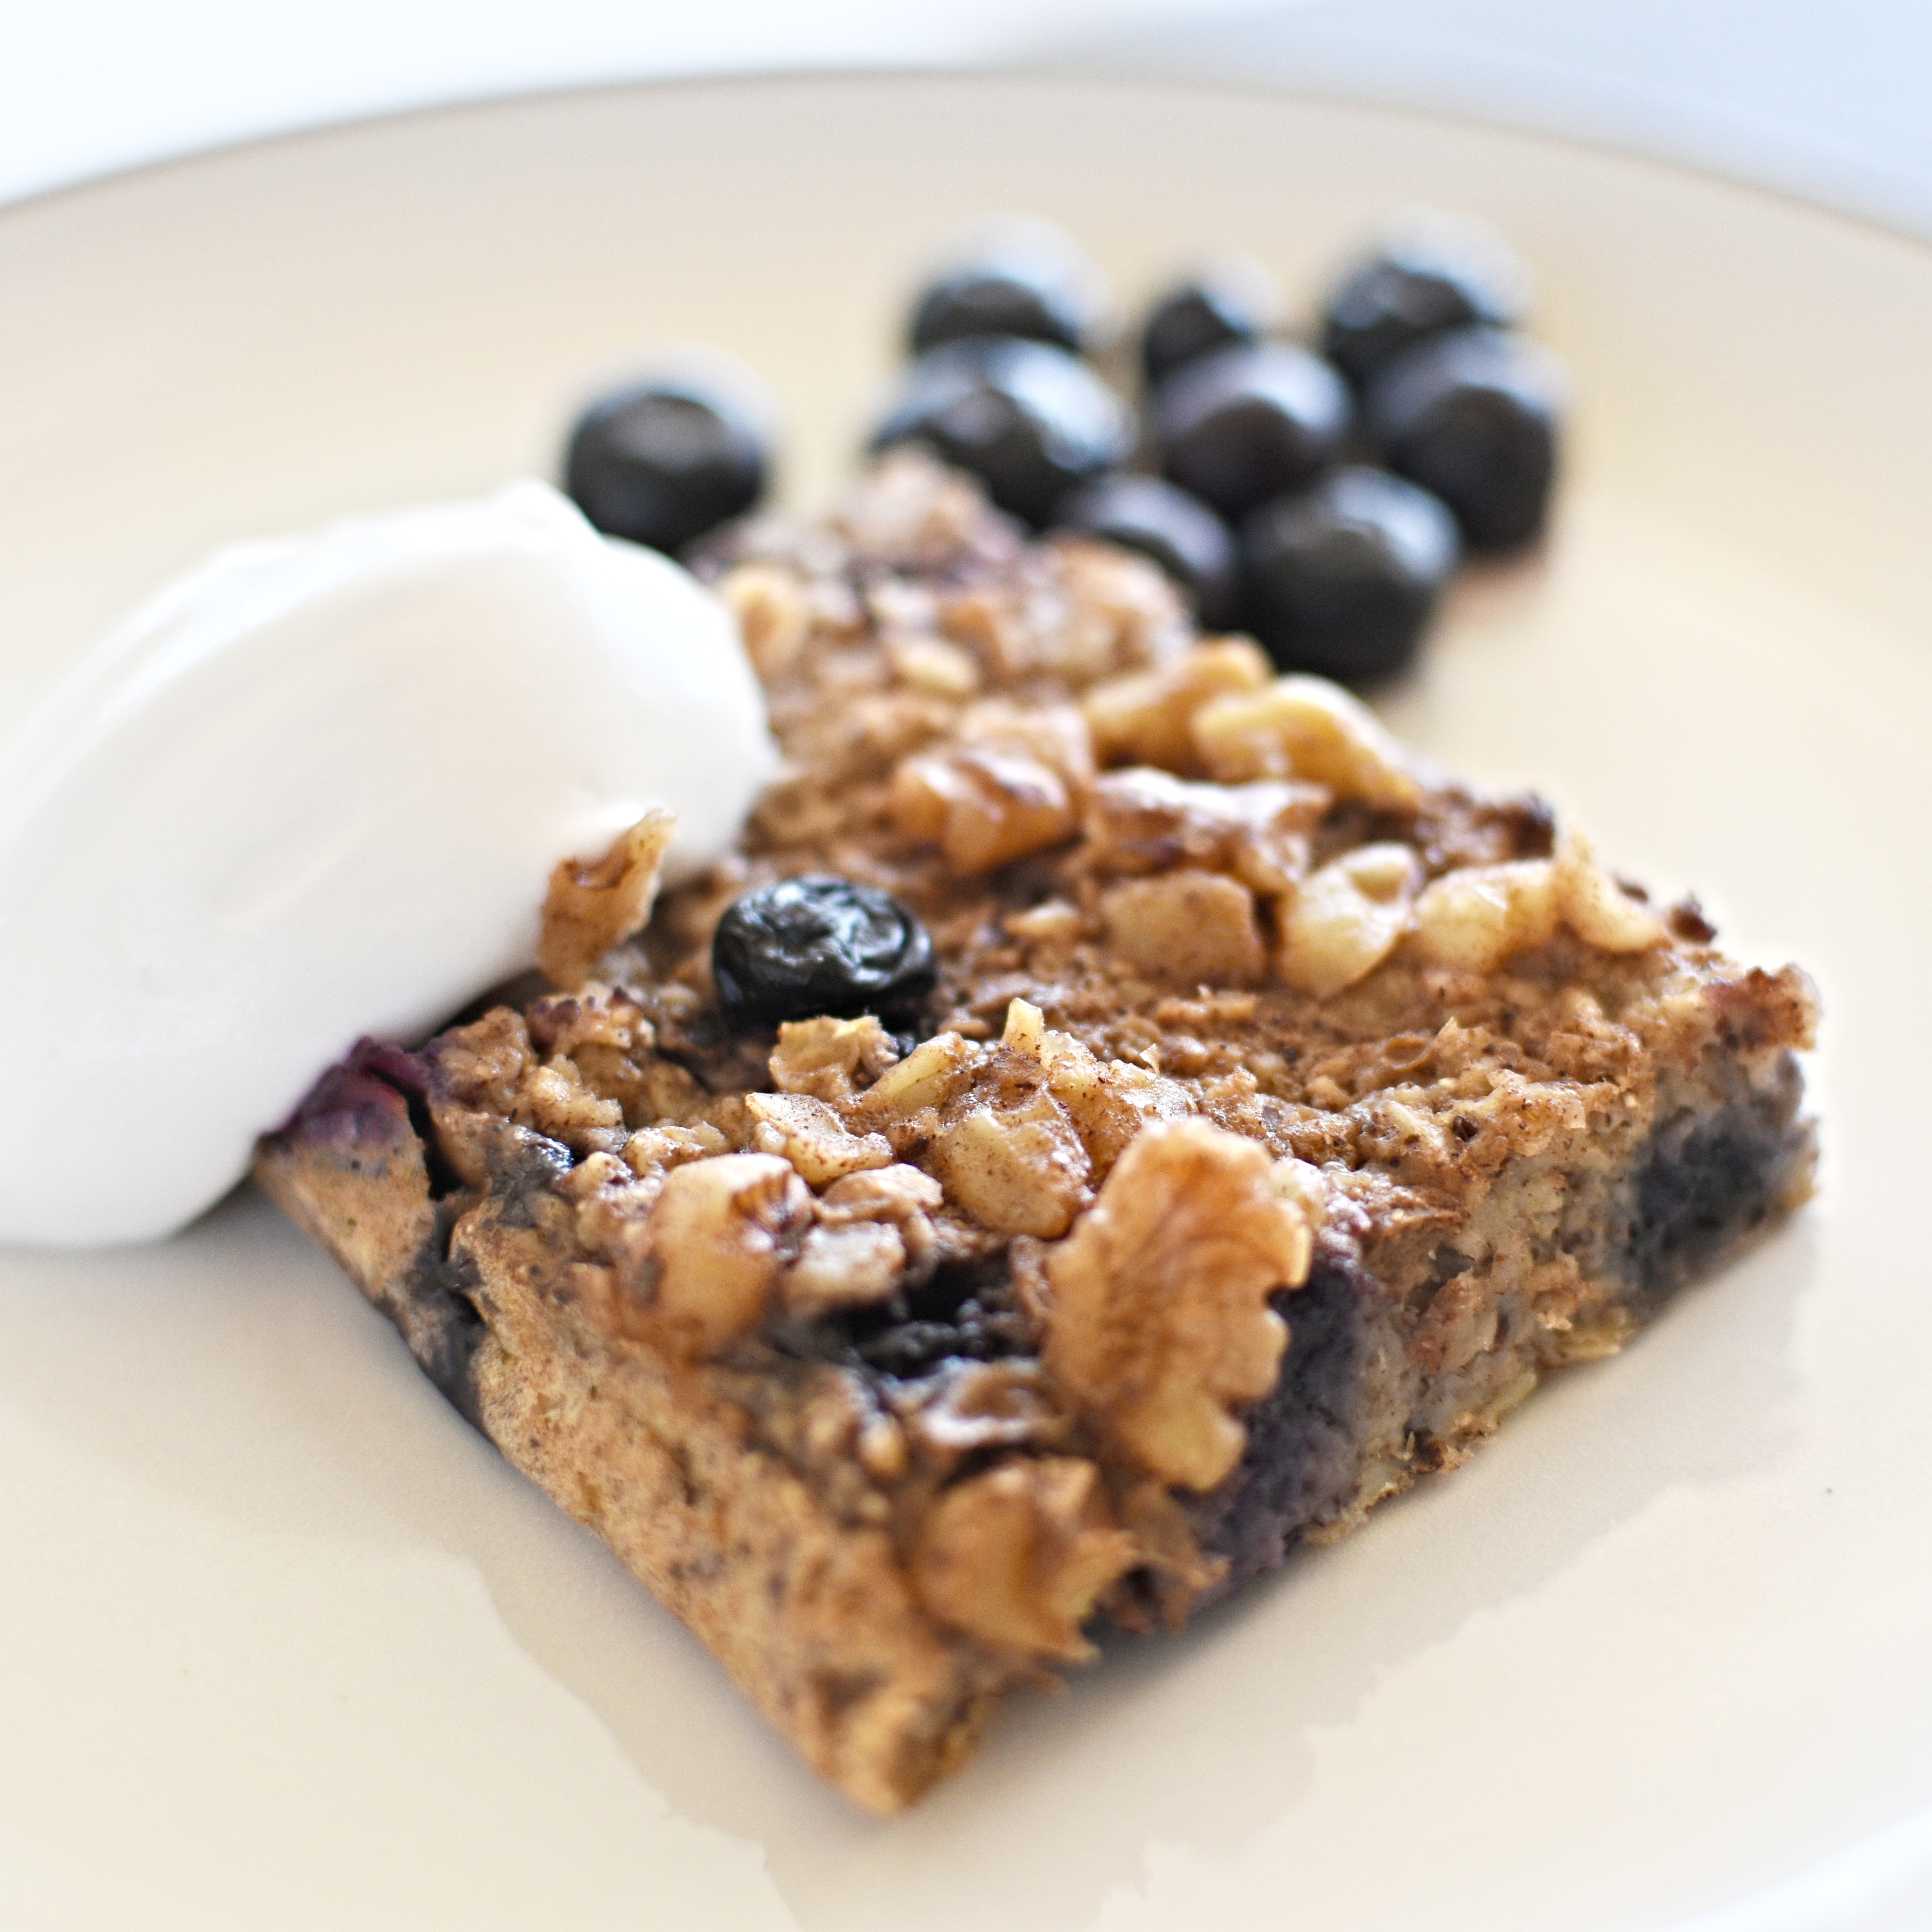 Baked blueberry oats